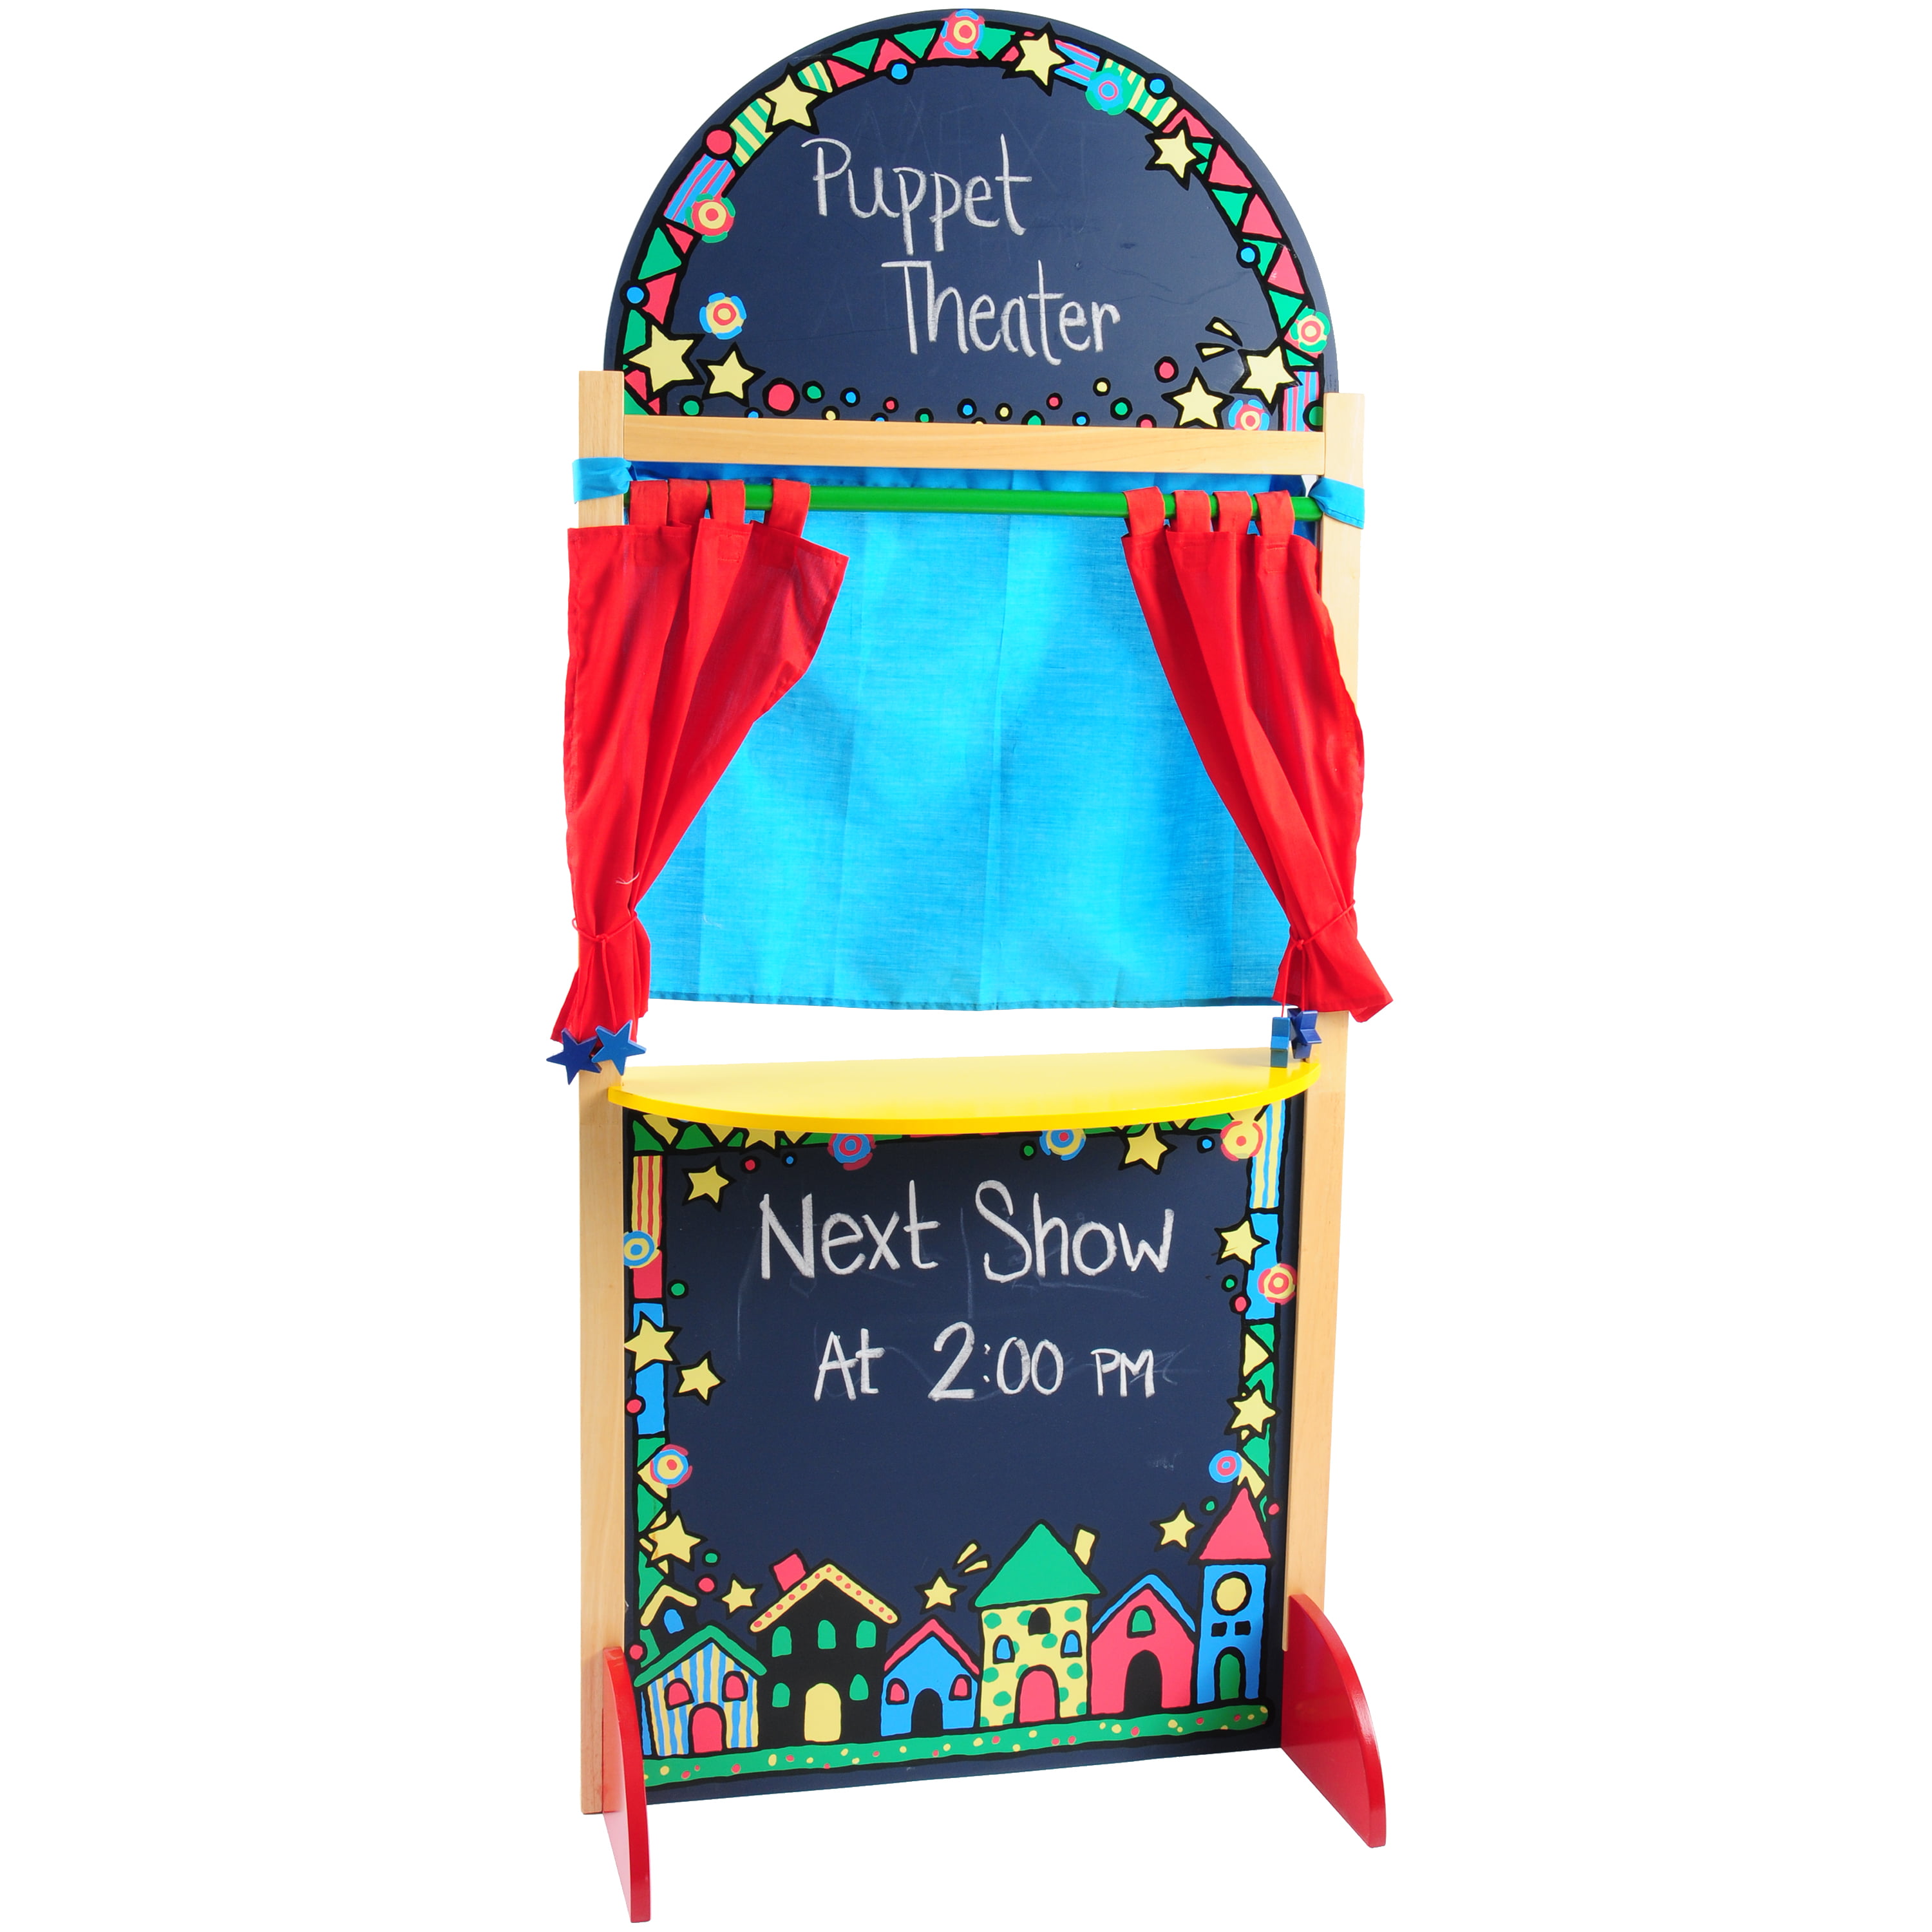 Wooden Puppet Theater Stage Kids Educational Show Hand Pretend Play Puppeteer US 